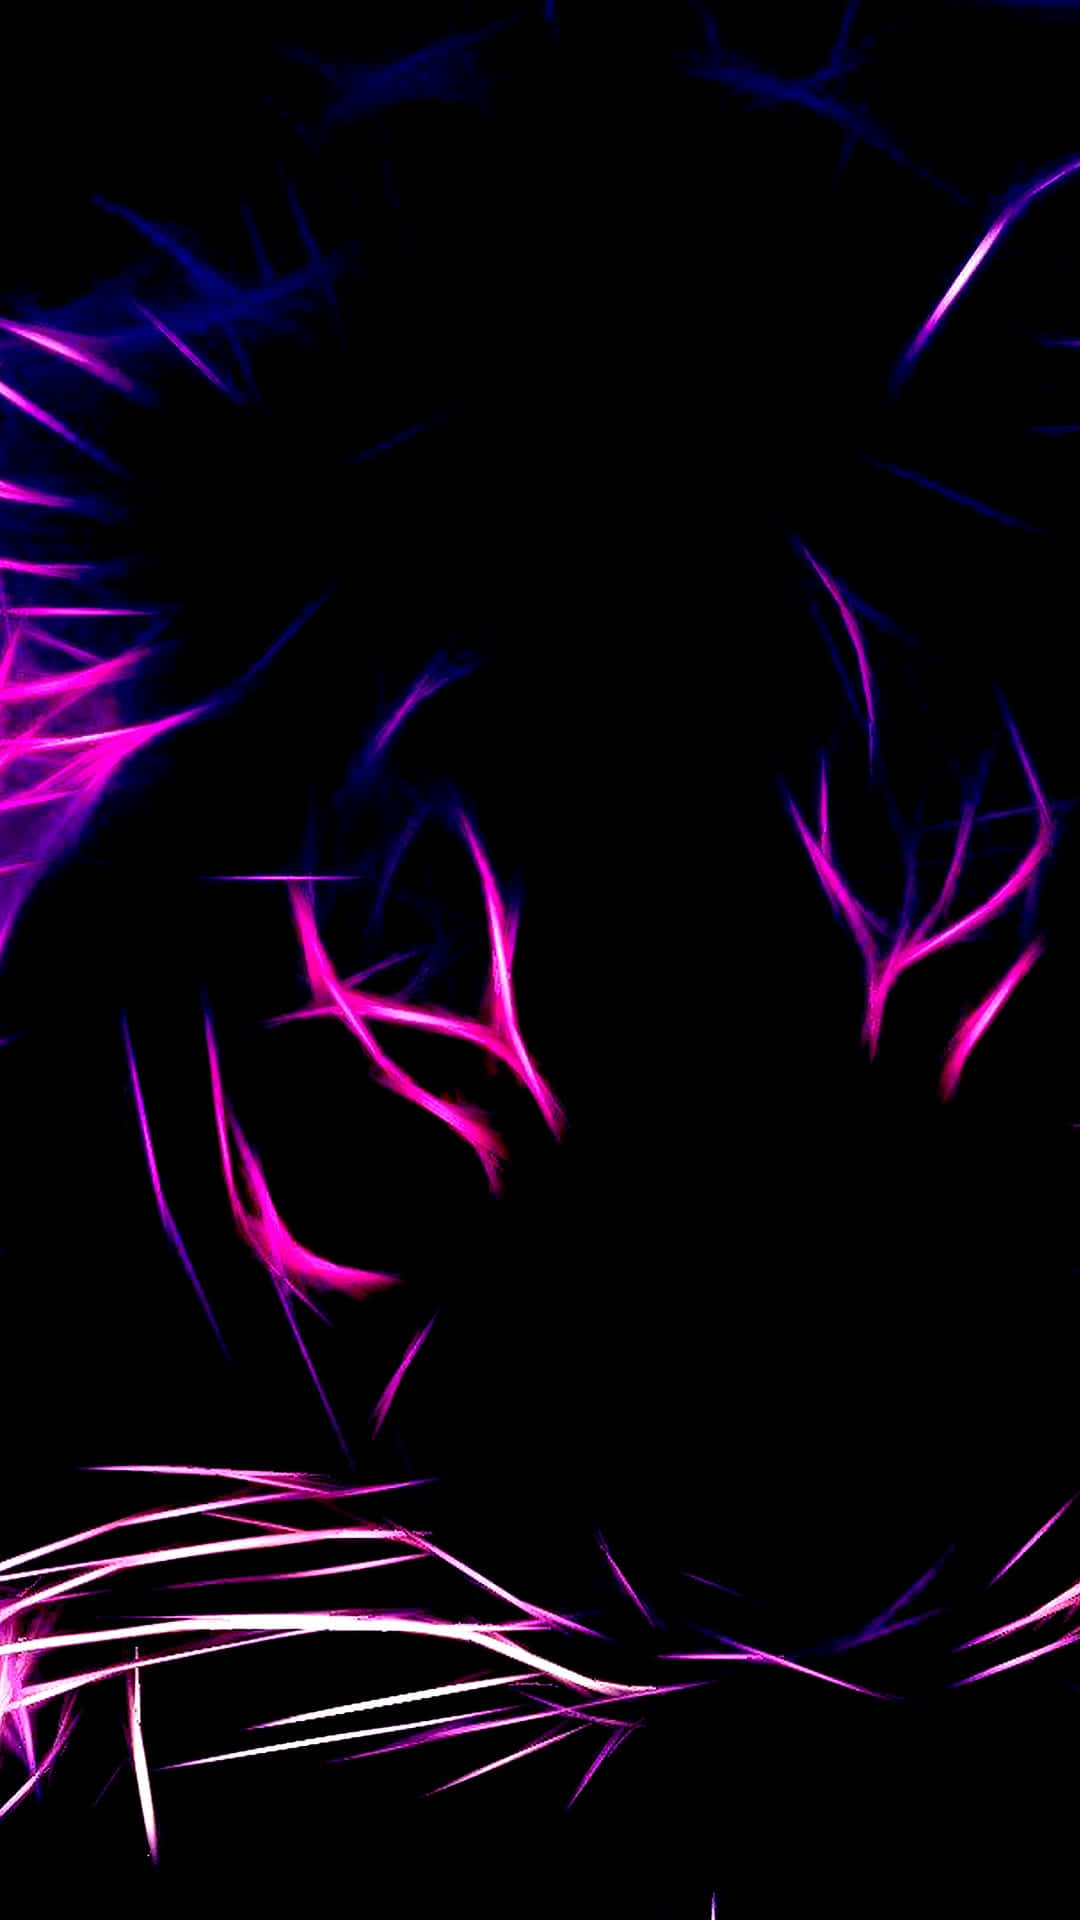 A Purple And Pink Tiger With A Black Background